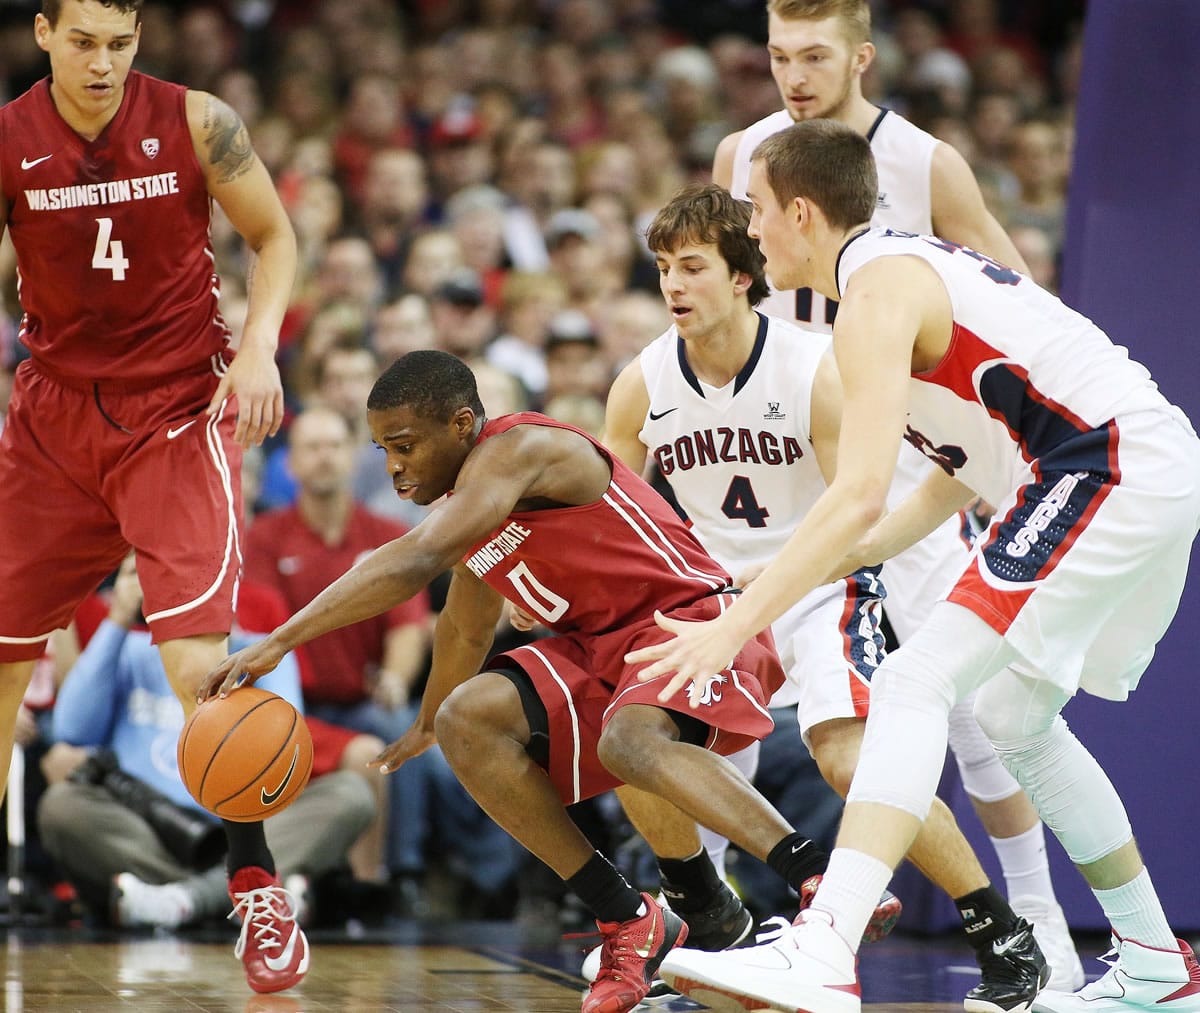 Washington State's Ike Iroegbu (0) goes after a loose ball against Gonzaga's Kyle Wiltjer, right, and Kevin Pangos during the first half in Spokane on Wednesday.